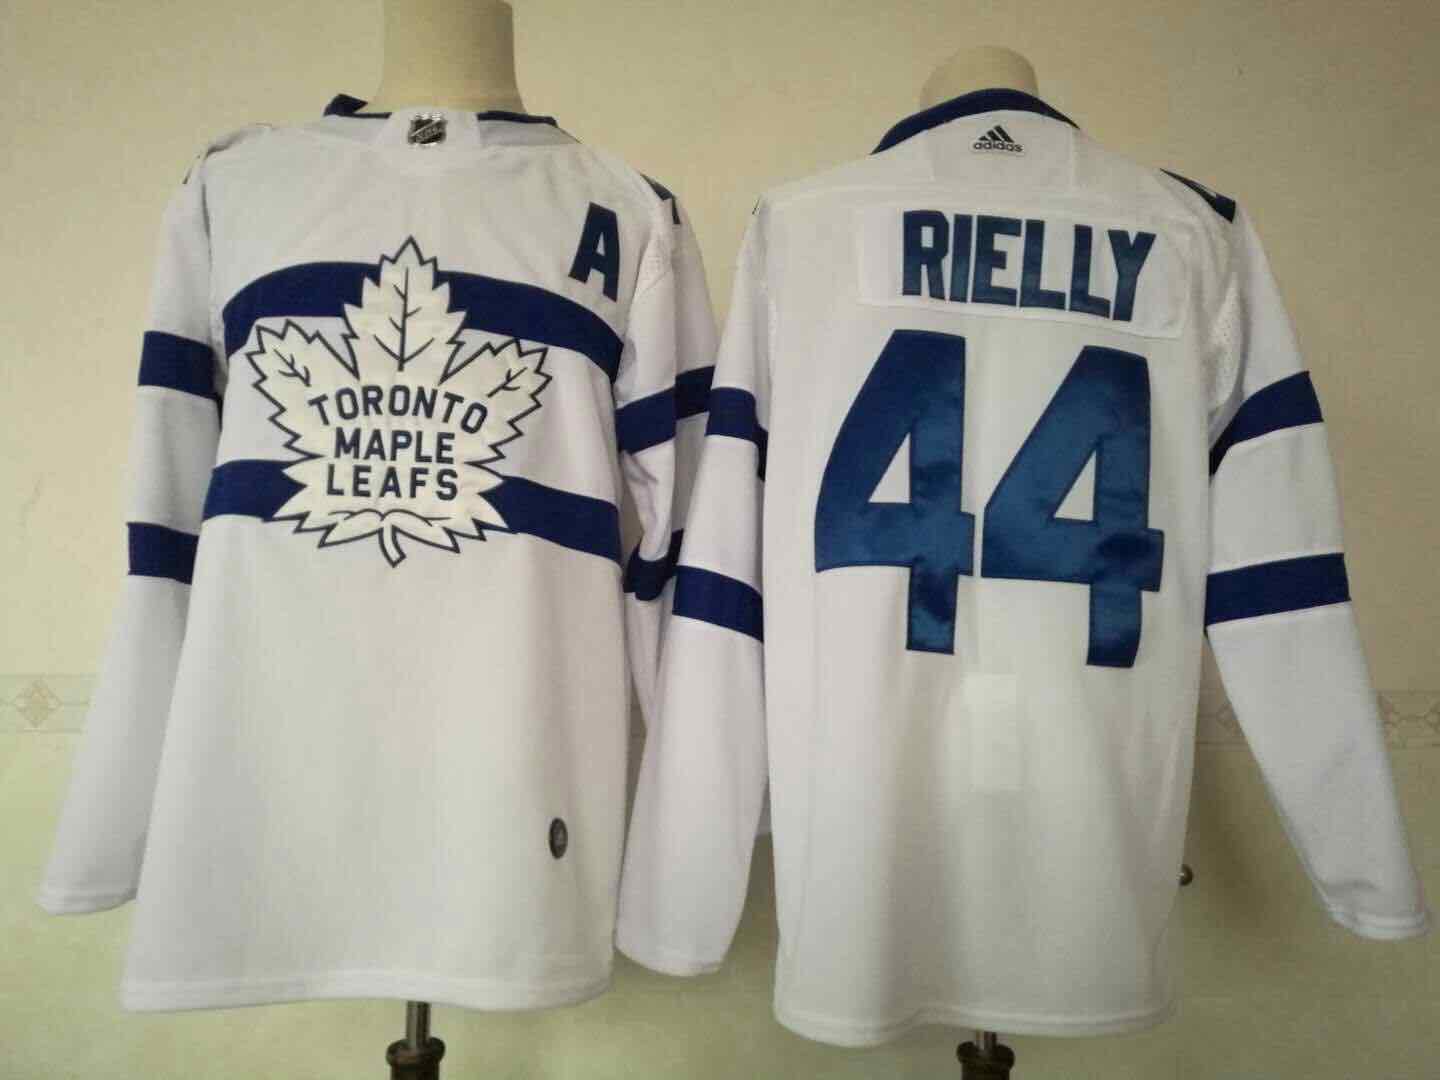 Adidas NHL Toronto Maple Leafs #44 Rielly White Jersey